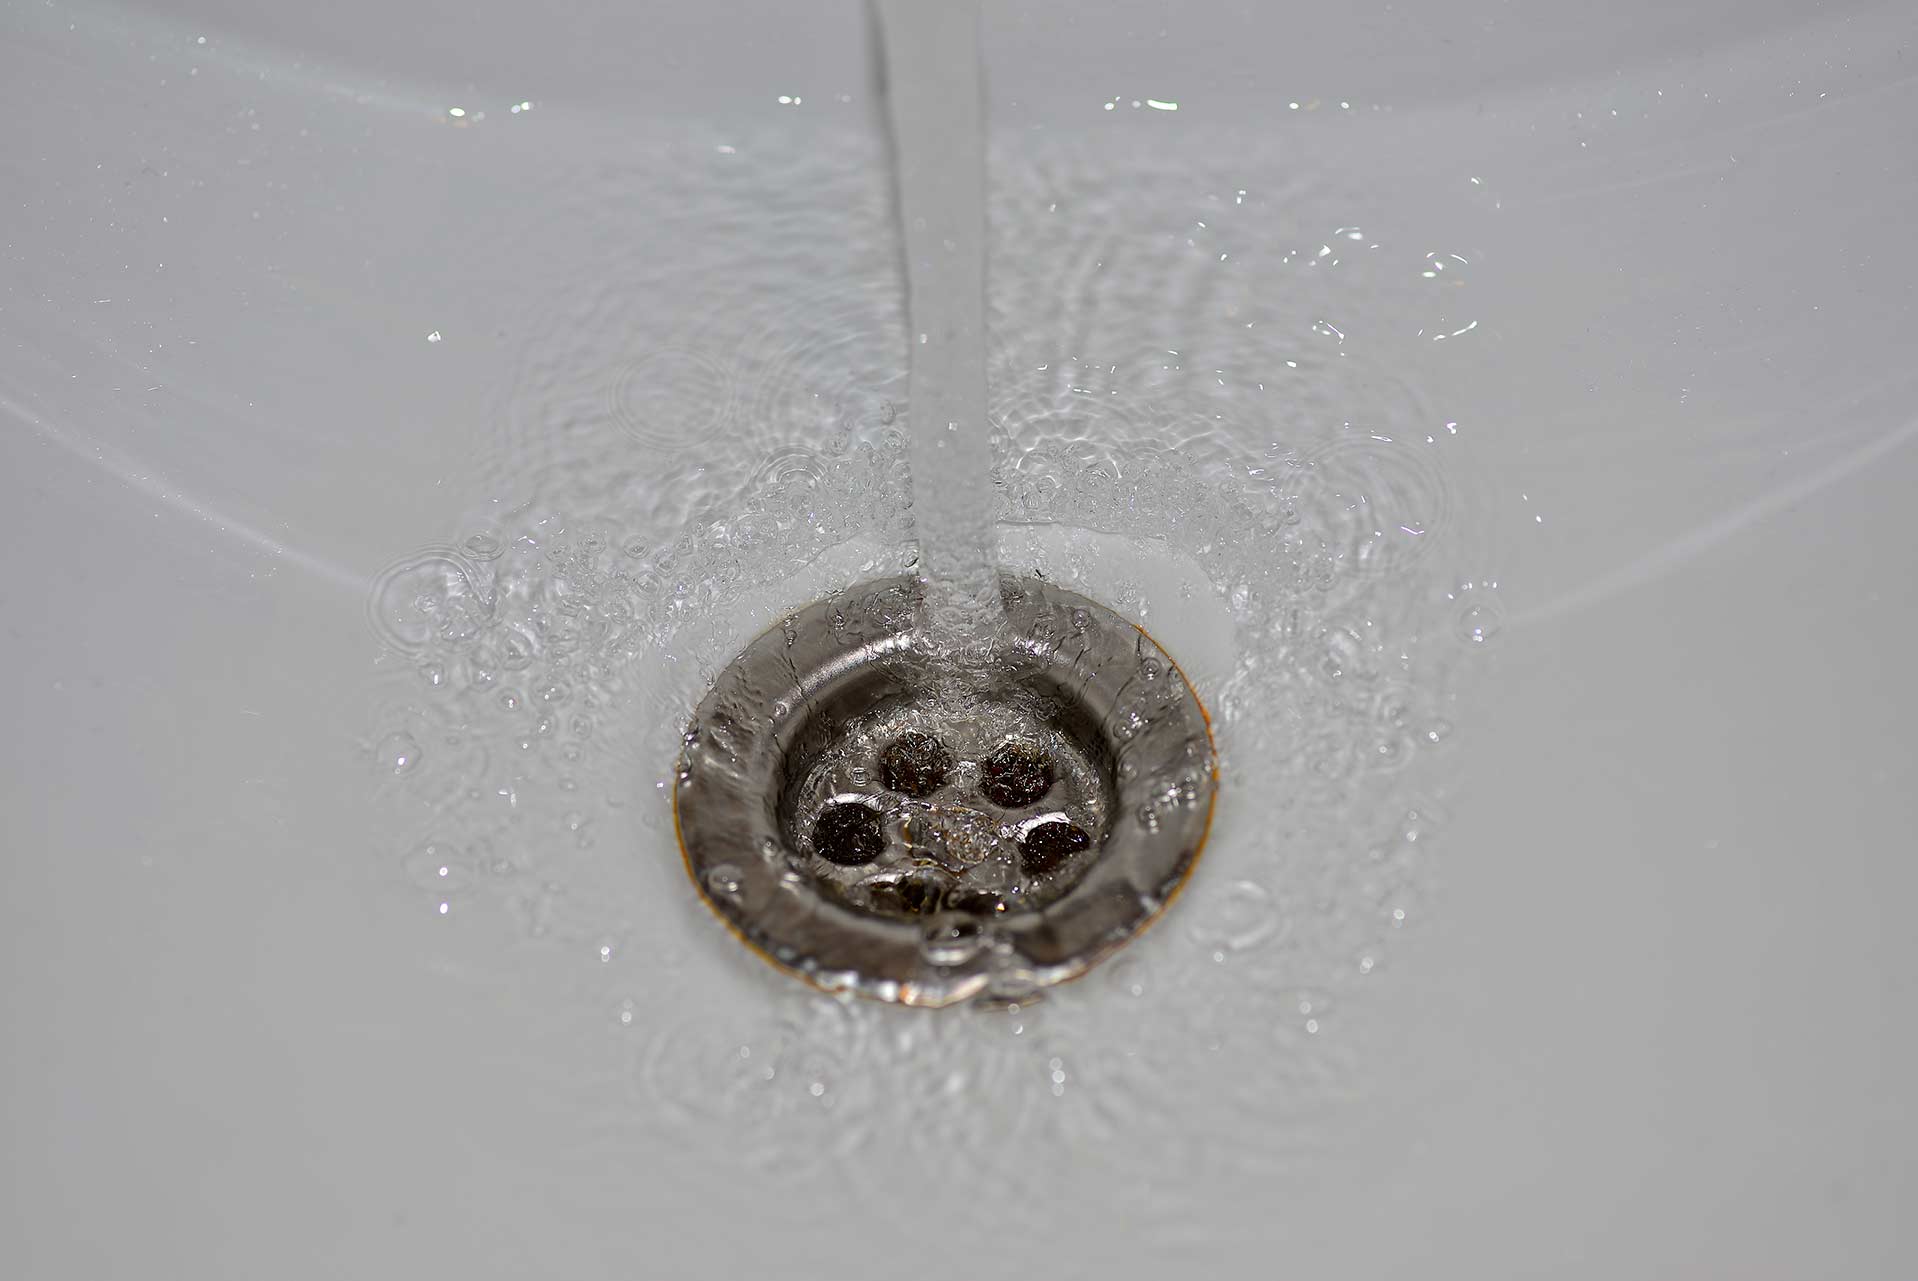 A2B Drains provides services to unblock blocked sinks and drains for properties in South Kensington.